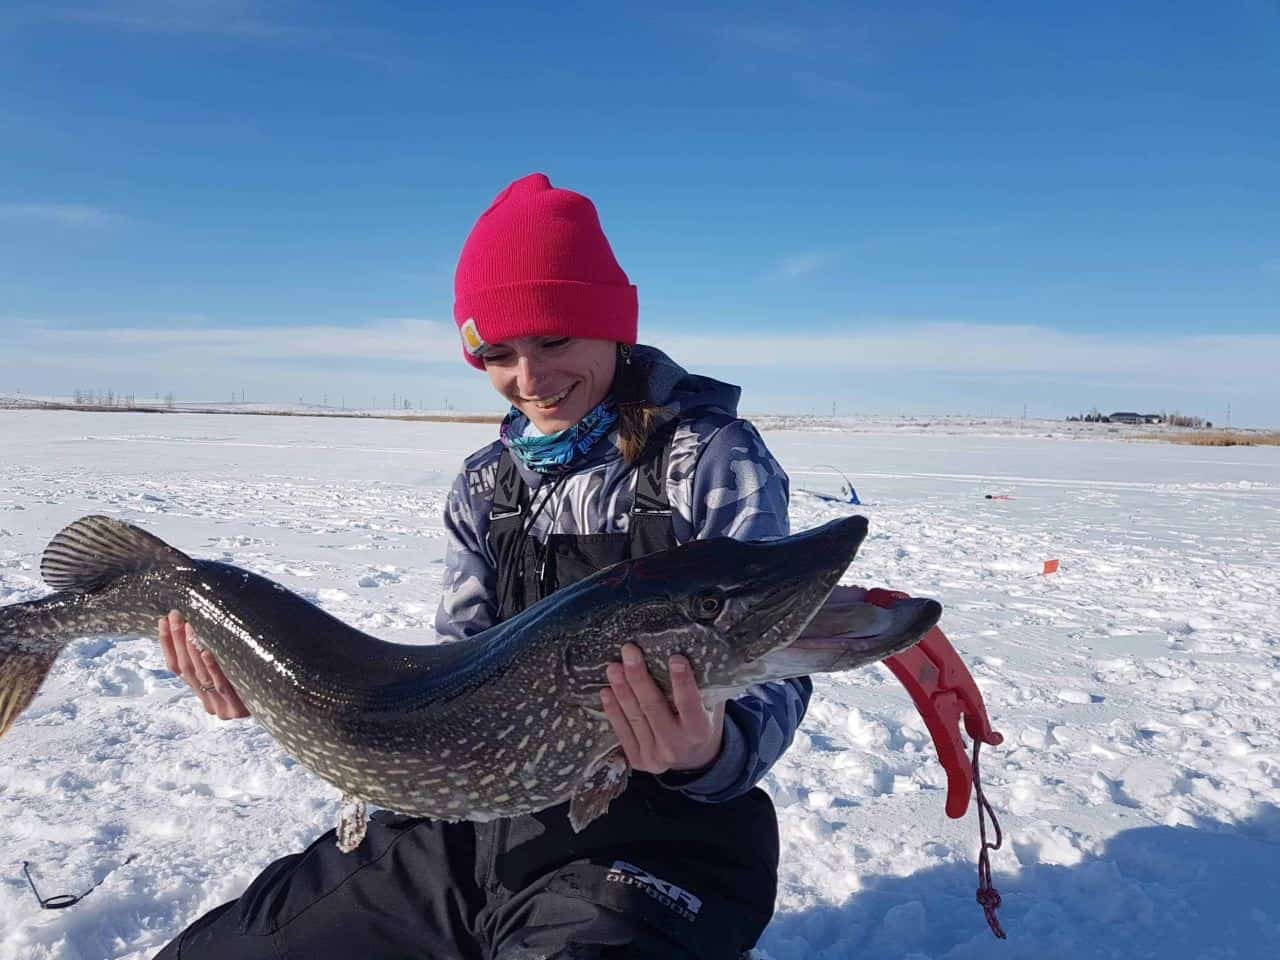 While ice fishing Lake Newell in southern Alberta Canada, I caught this nice northern pike on a tip-up. Brooks is a great winter destination as well.